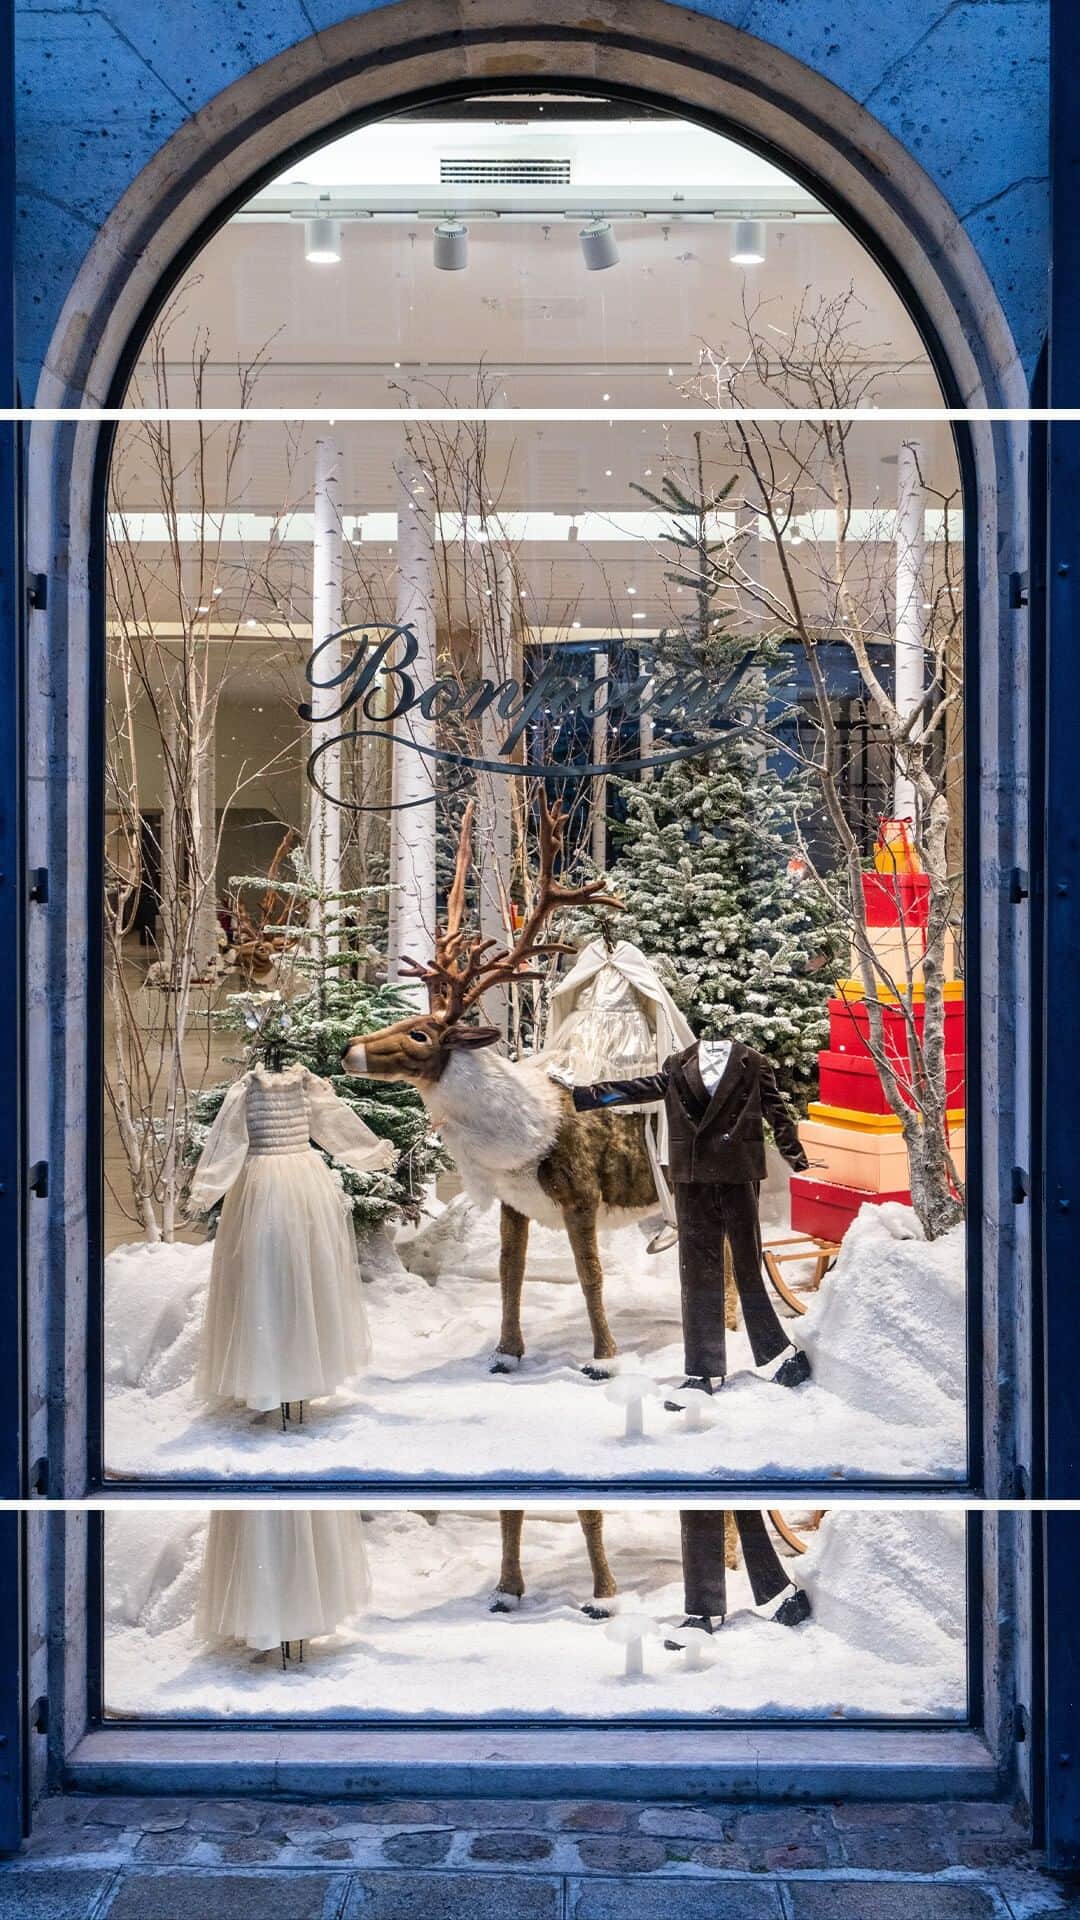 bonpointのインスタグラム：「Bonpoint Holidays | Let the countdown begin! ❄️​ In the frosty atmosphere, preparations are well underway as snowflakes gently swirl all around. ​  Come by your nearest boutique to discover our festive window display. ​  #Bonpoint #BonpointHolidays」